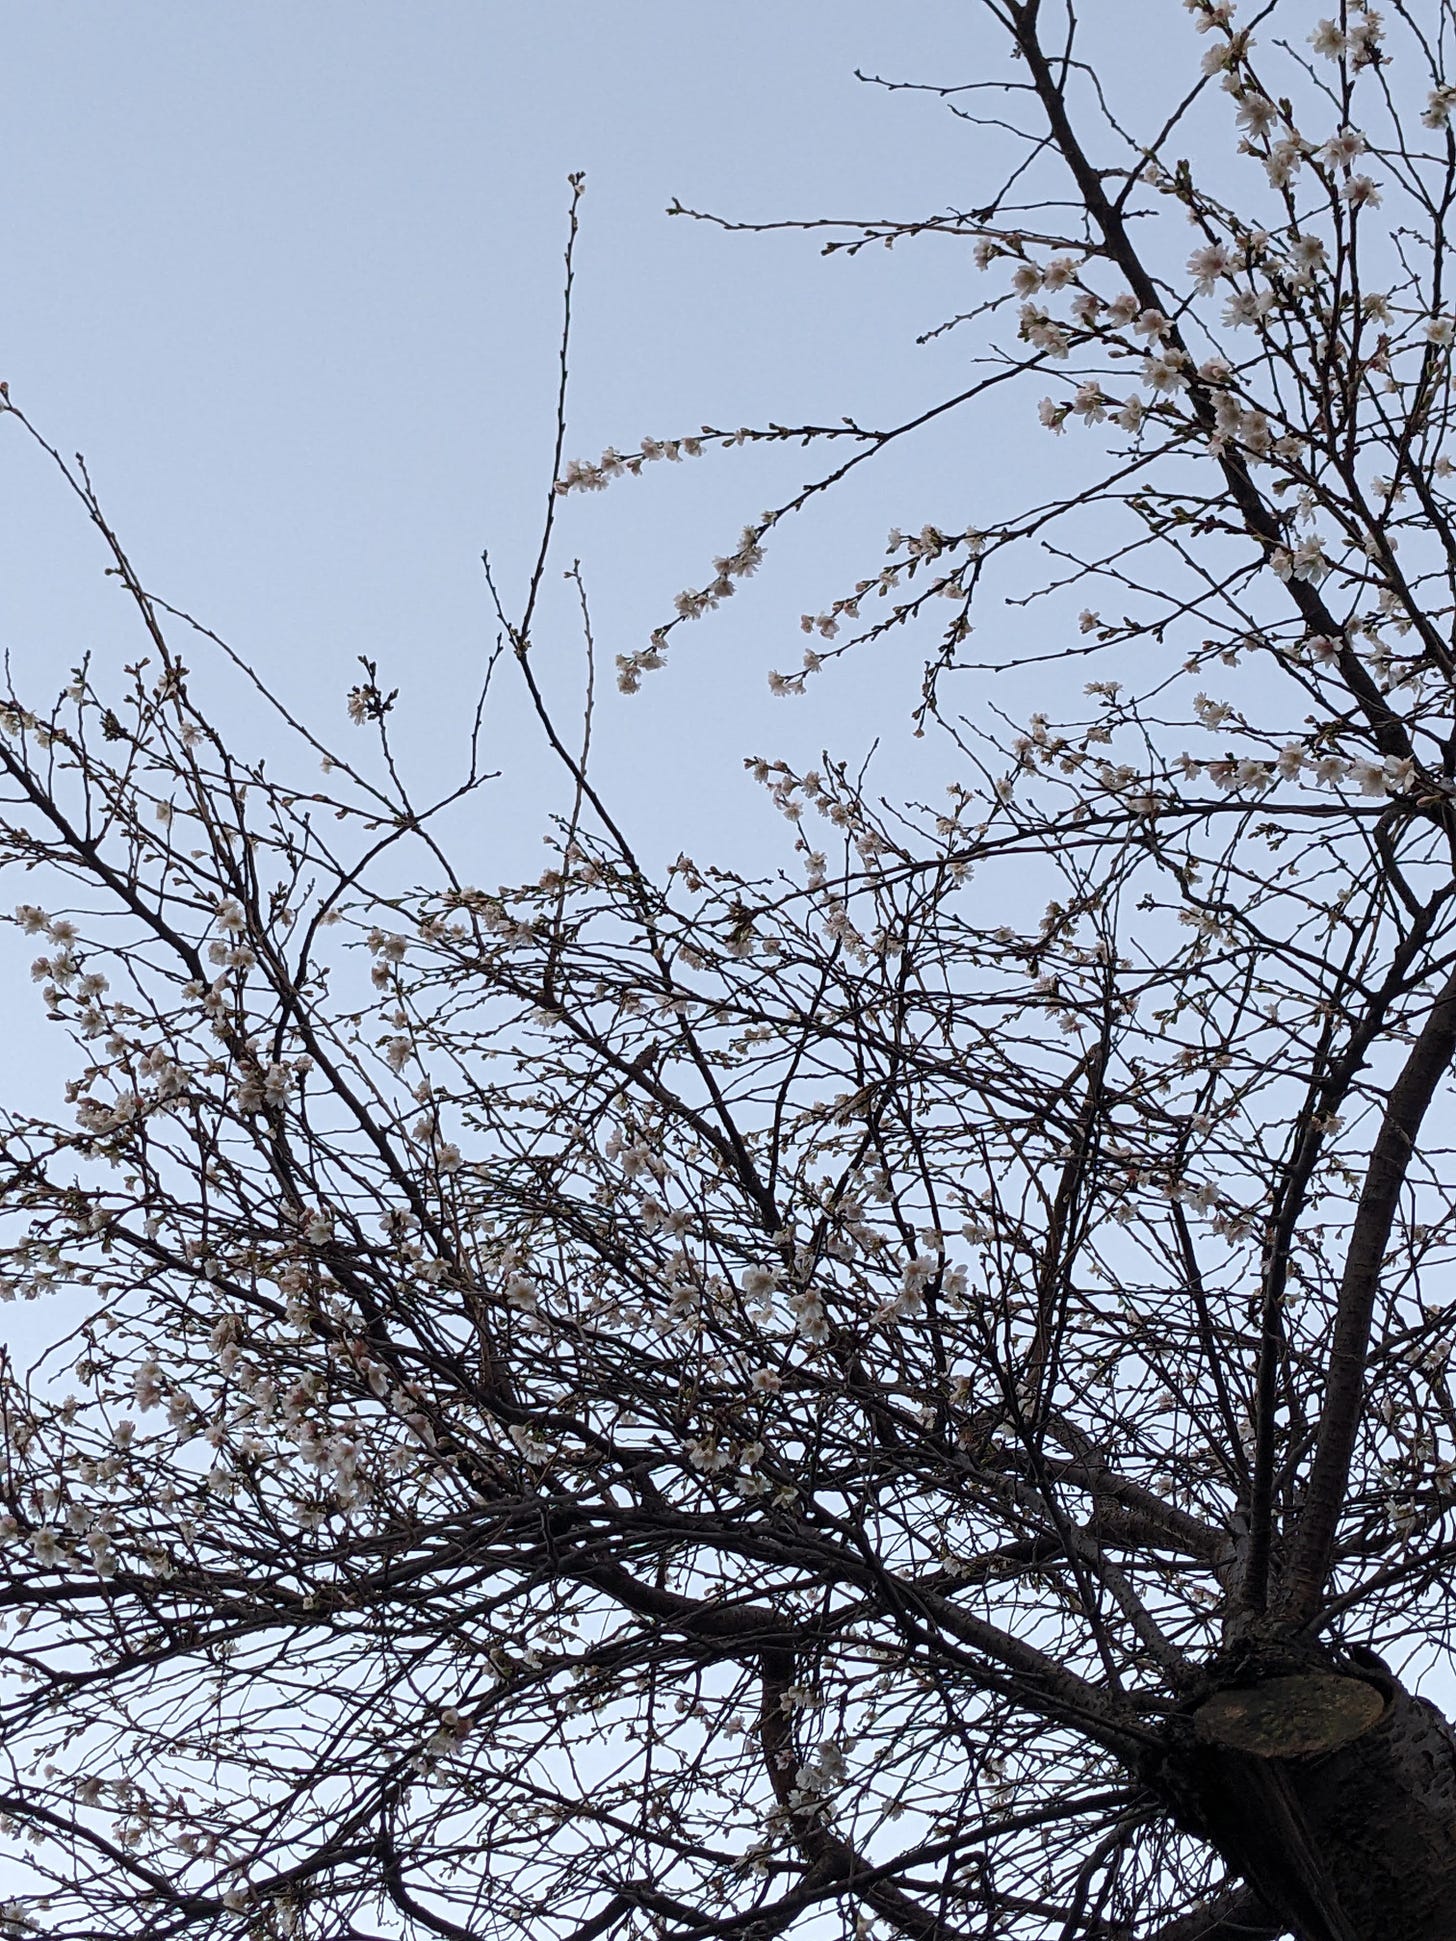 A tree in pale blossom against a blue-gray sky